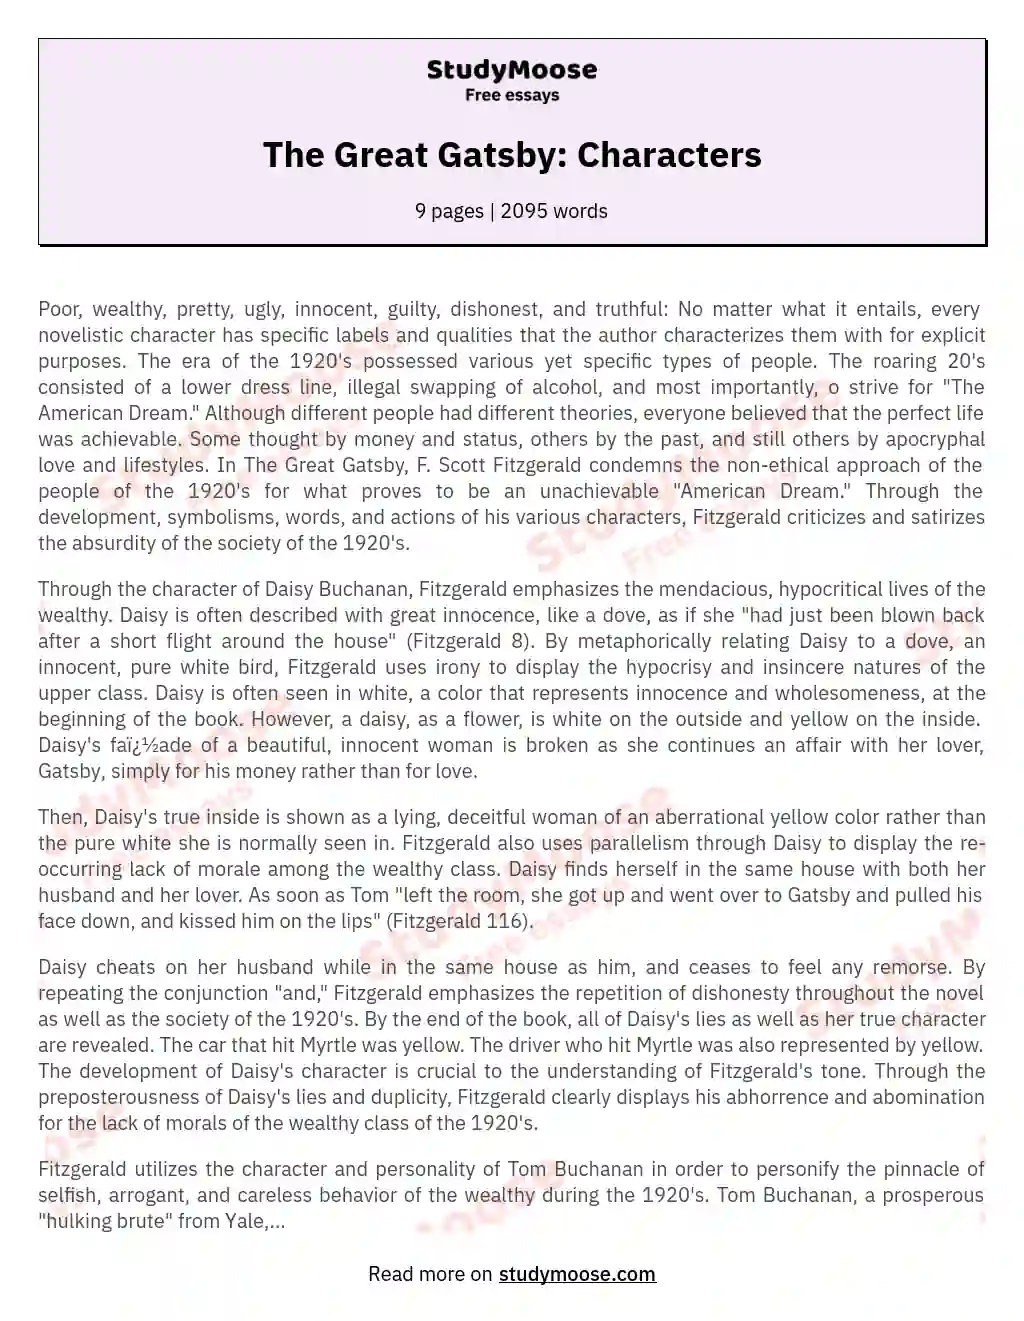 The Great Gatsby: Characters essay